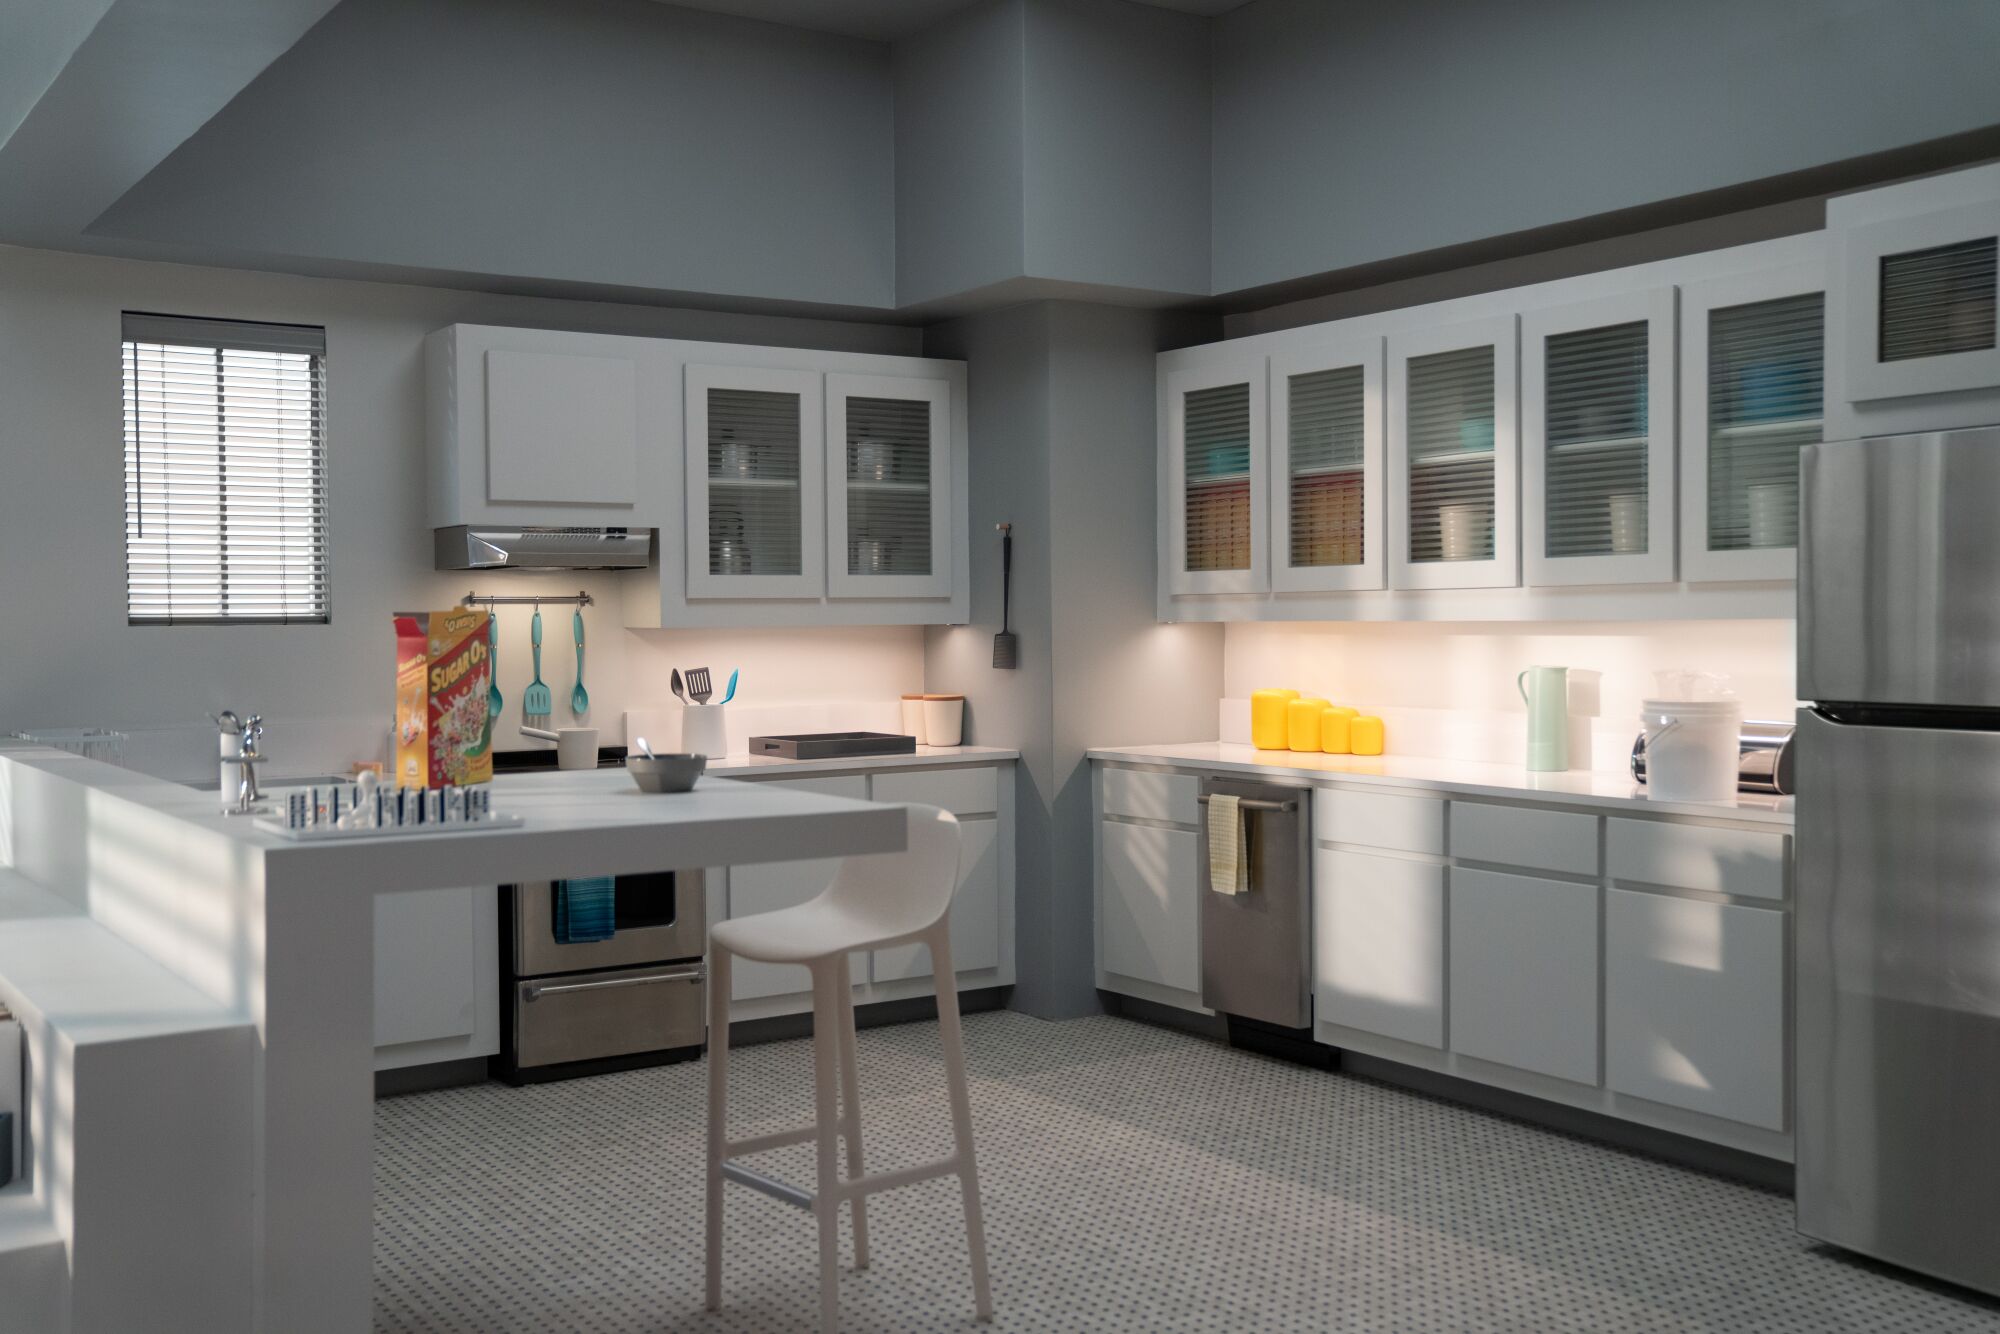 An apartment kitchen with one bar stool